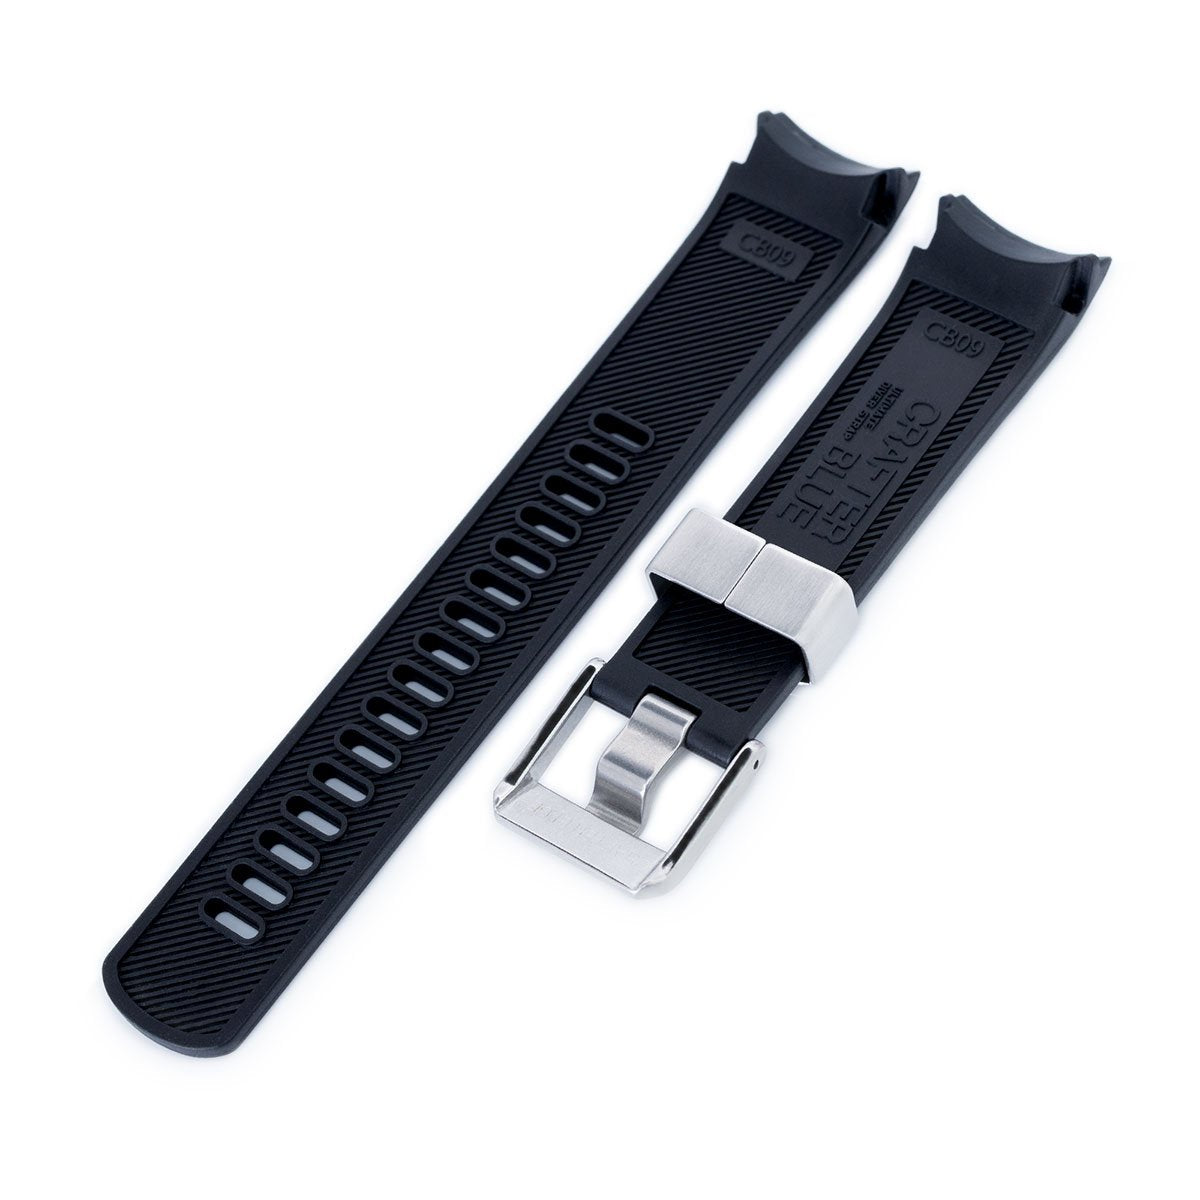 22mm Crafter Blue Black Rubber Curved Lug Watch Strap for Seiko Samurai SRPB51 Strapcode Watch Bands